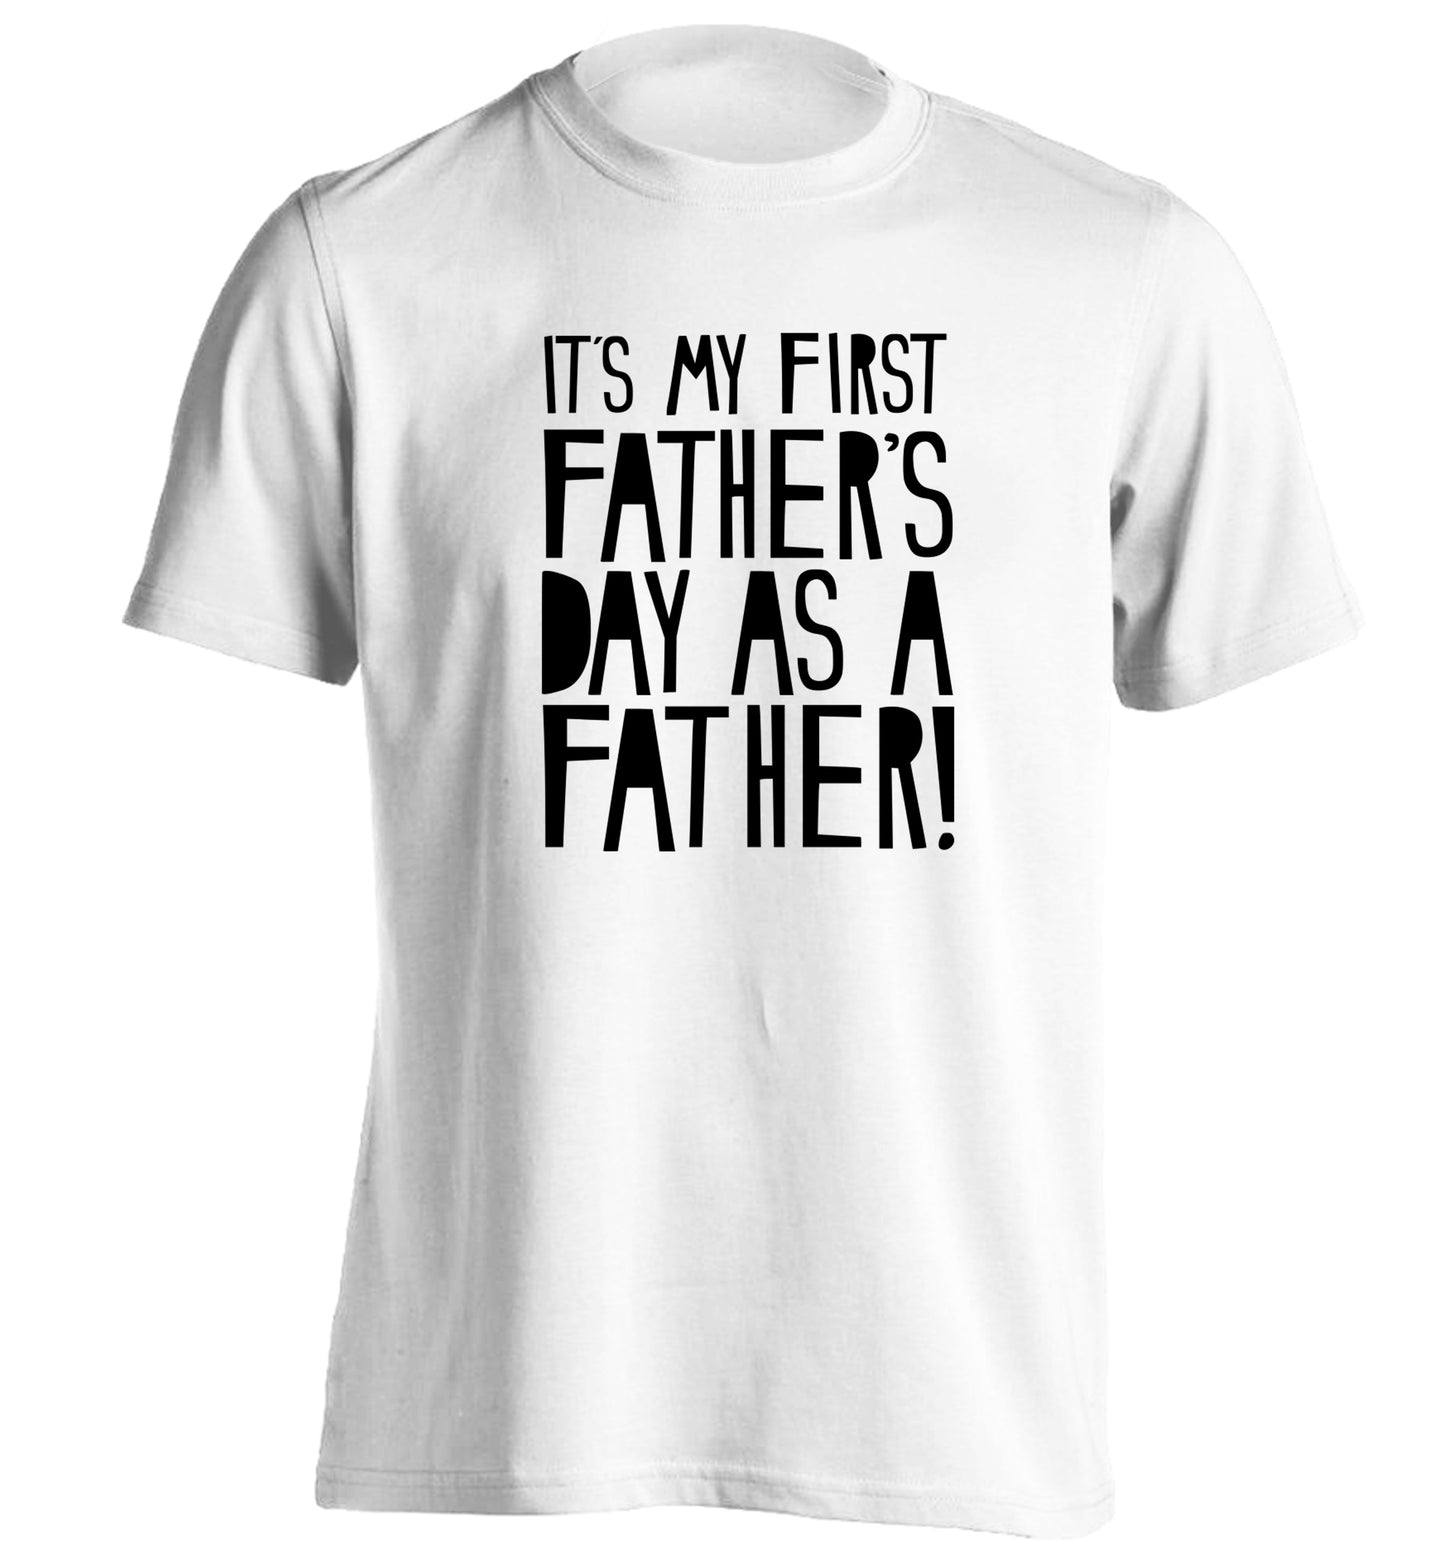 It's my first Father's Day as a father! adults unisex white Tshirt 2XL